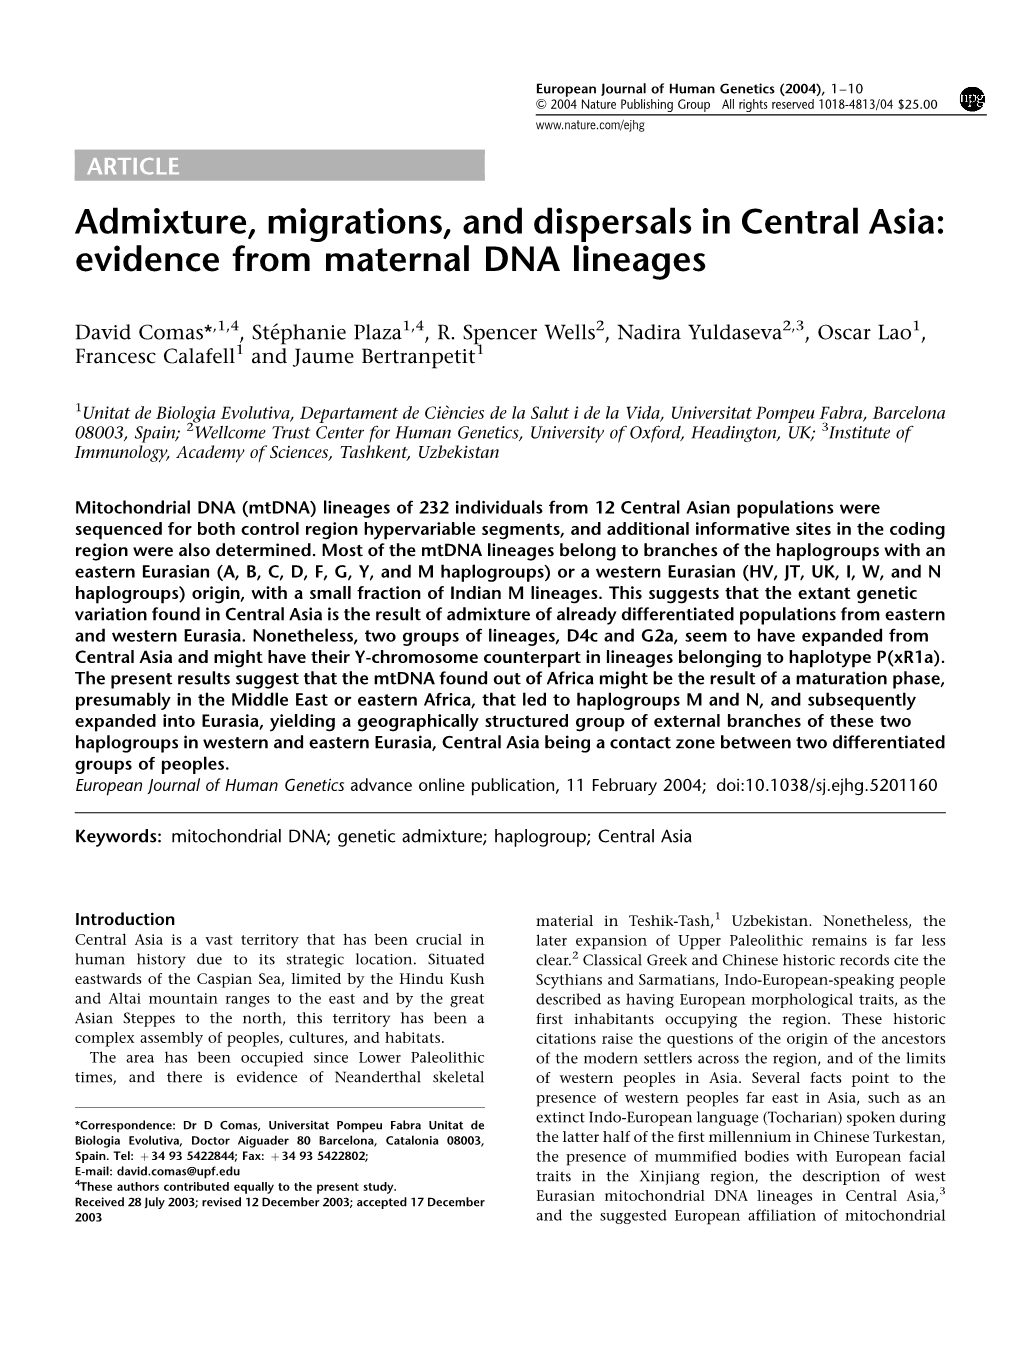 Admixture, Migrations, and Dispersals in Central Asia: Evidence from Maternal DNA Lineages